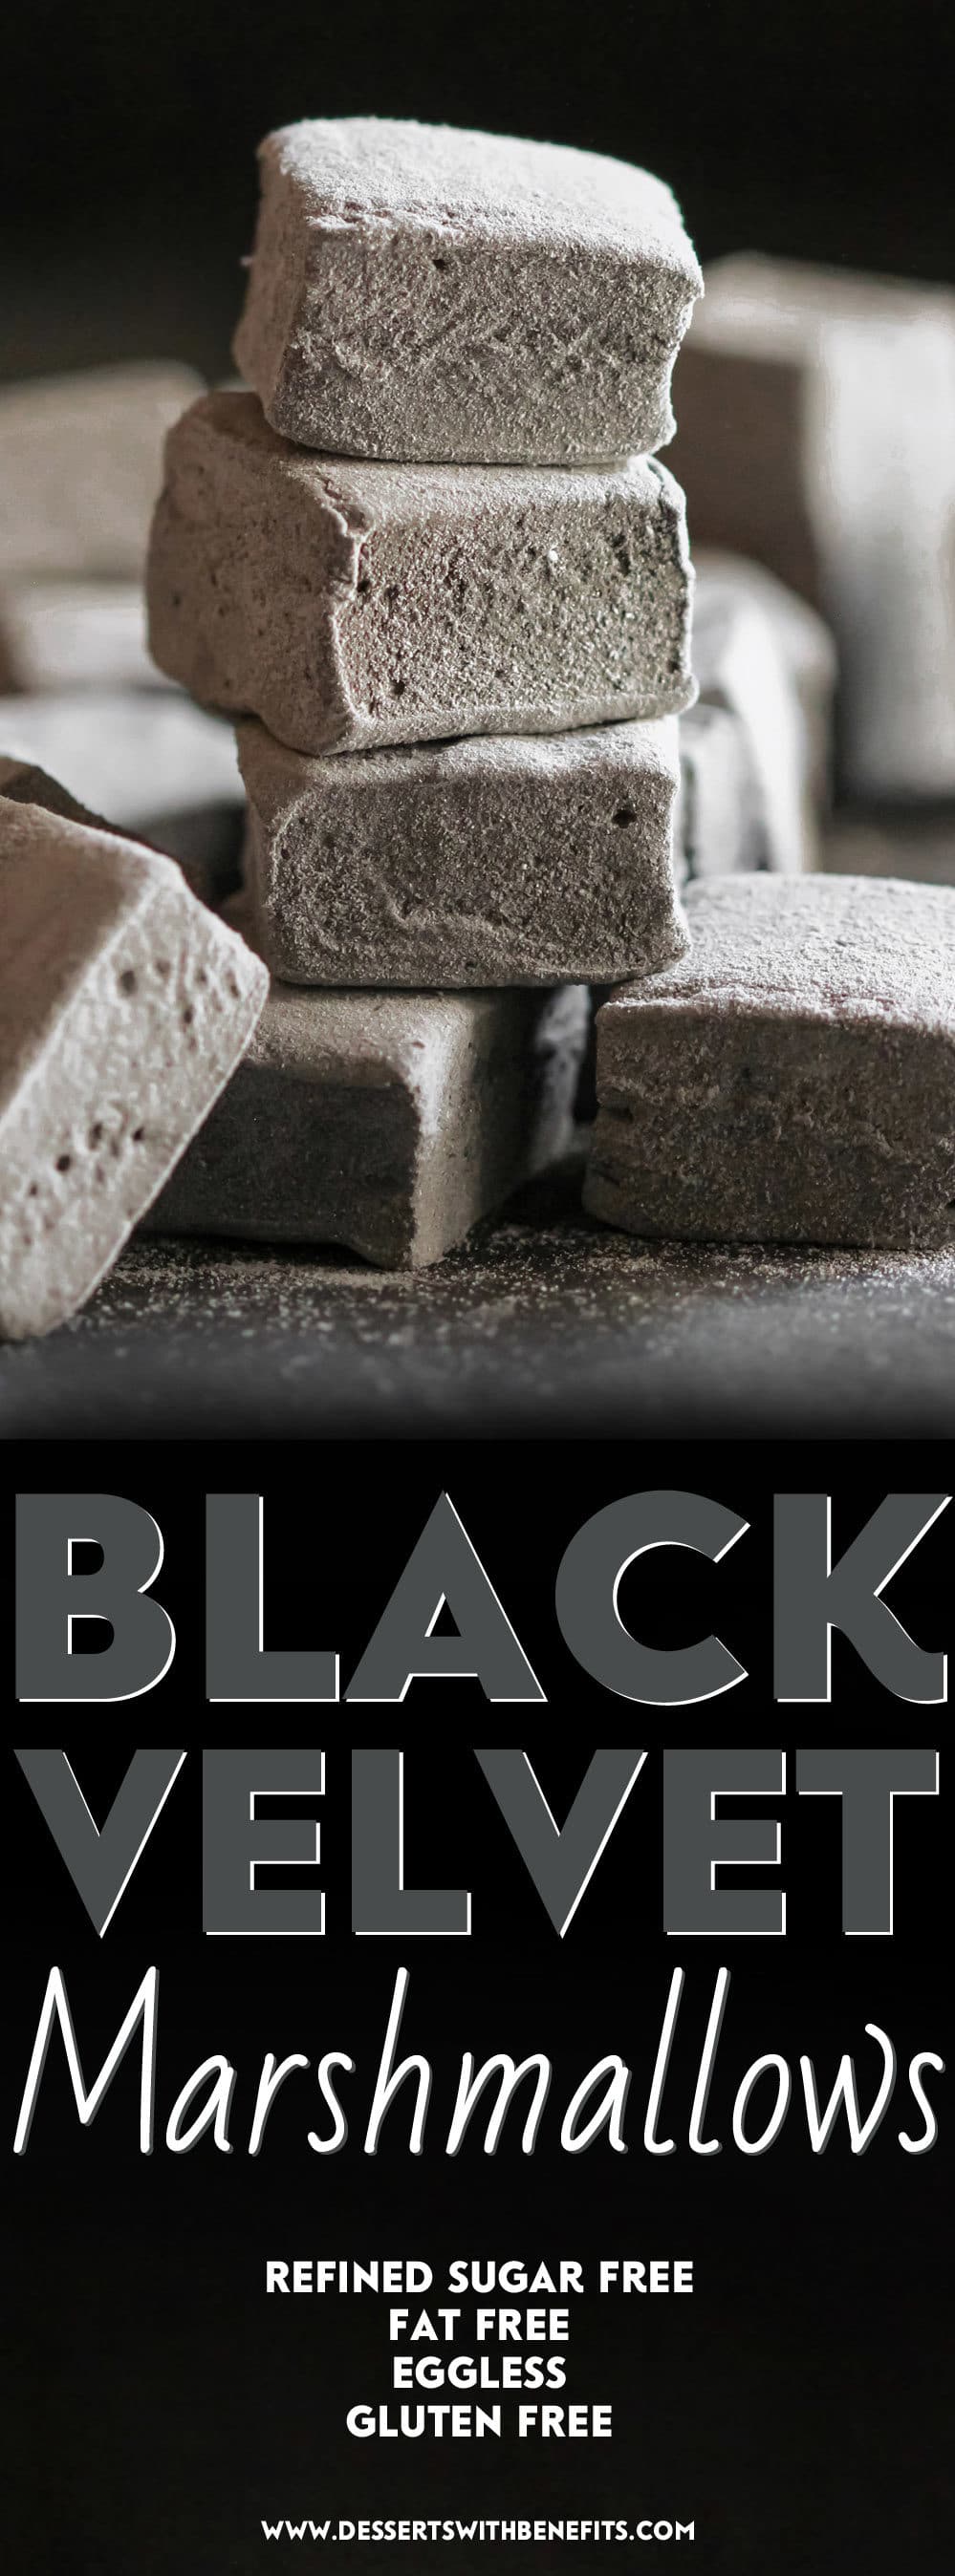 These Healthy Black Velvet Marshmallows are just as sweet and fluffy as regular marshmallows, but they're infused with chocolate and a SECRET INGREDIENT! These homemade marshmallows are naturally sweetened and naturally colored – made without corn syrup and artificial food dye. PERFECT for Halloween! (How to Make Marshmallows) Healthy Dessert Recipes at the Desserts With Benefits Blog